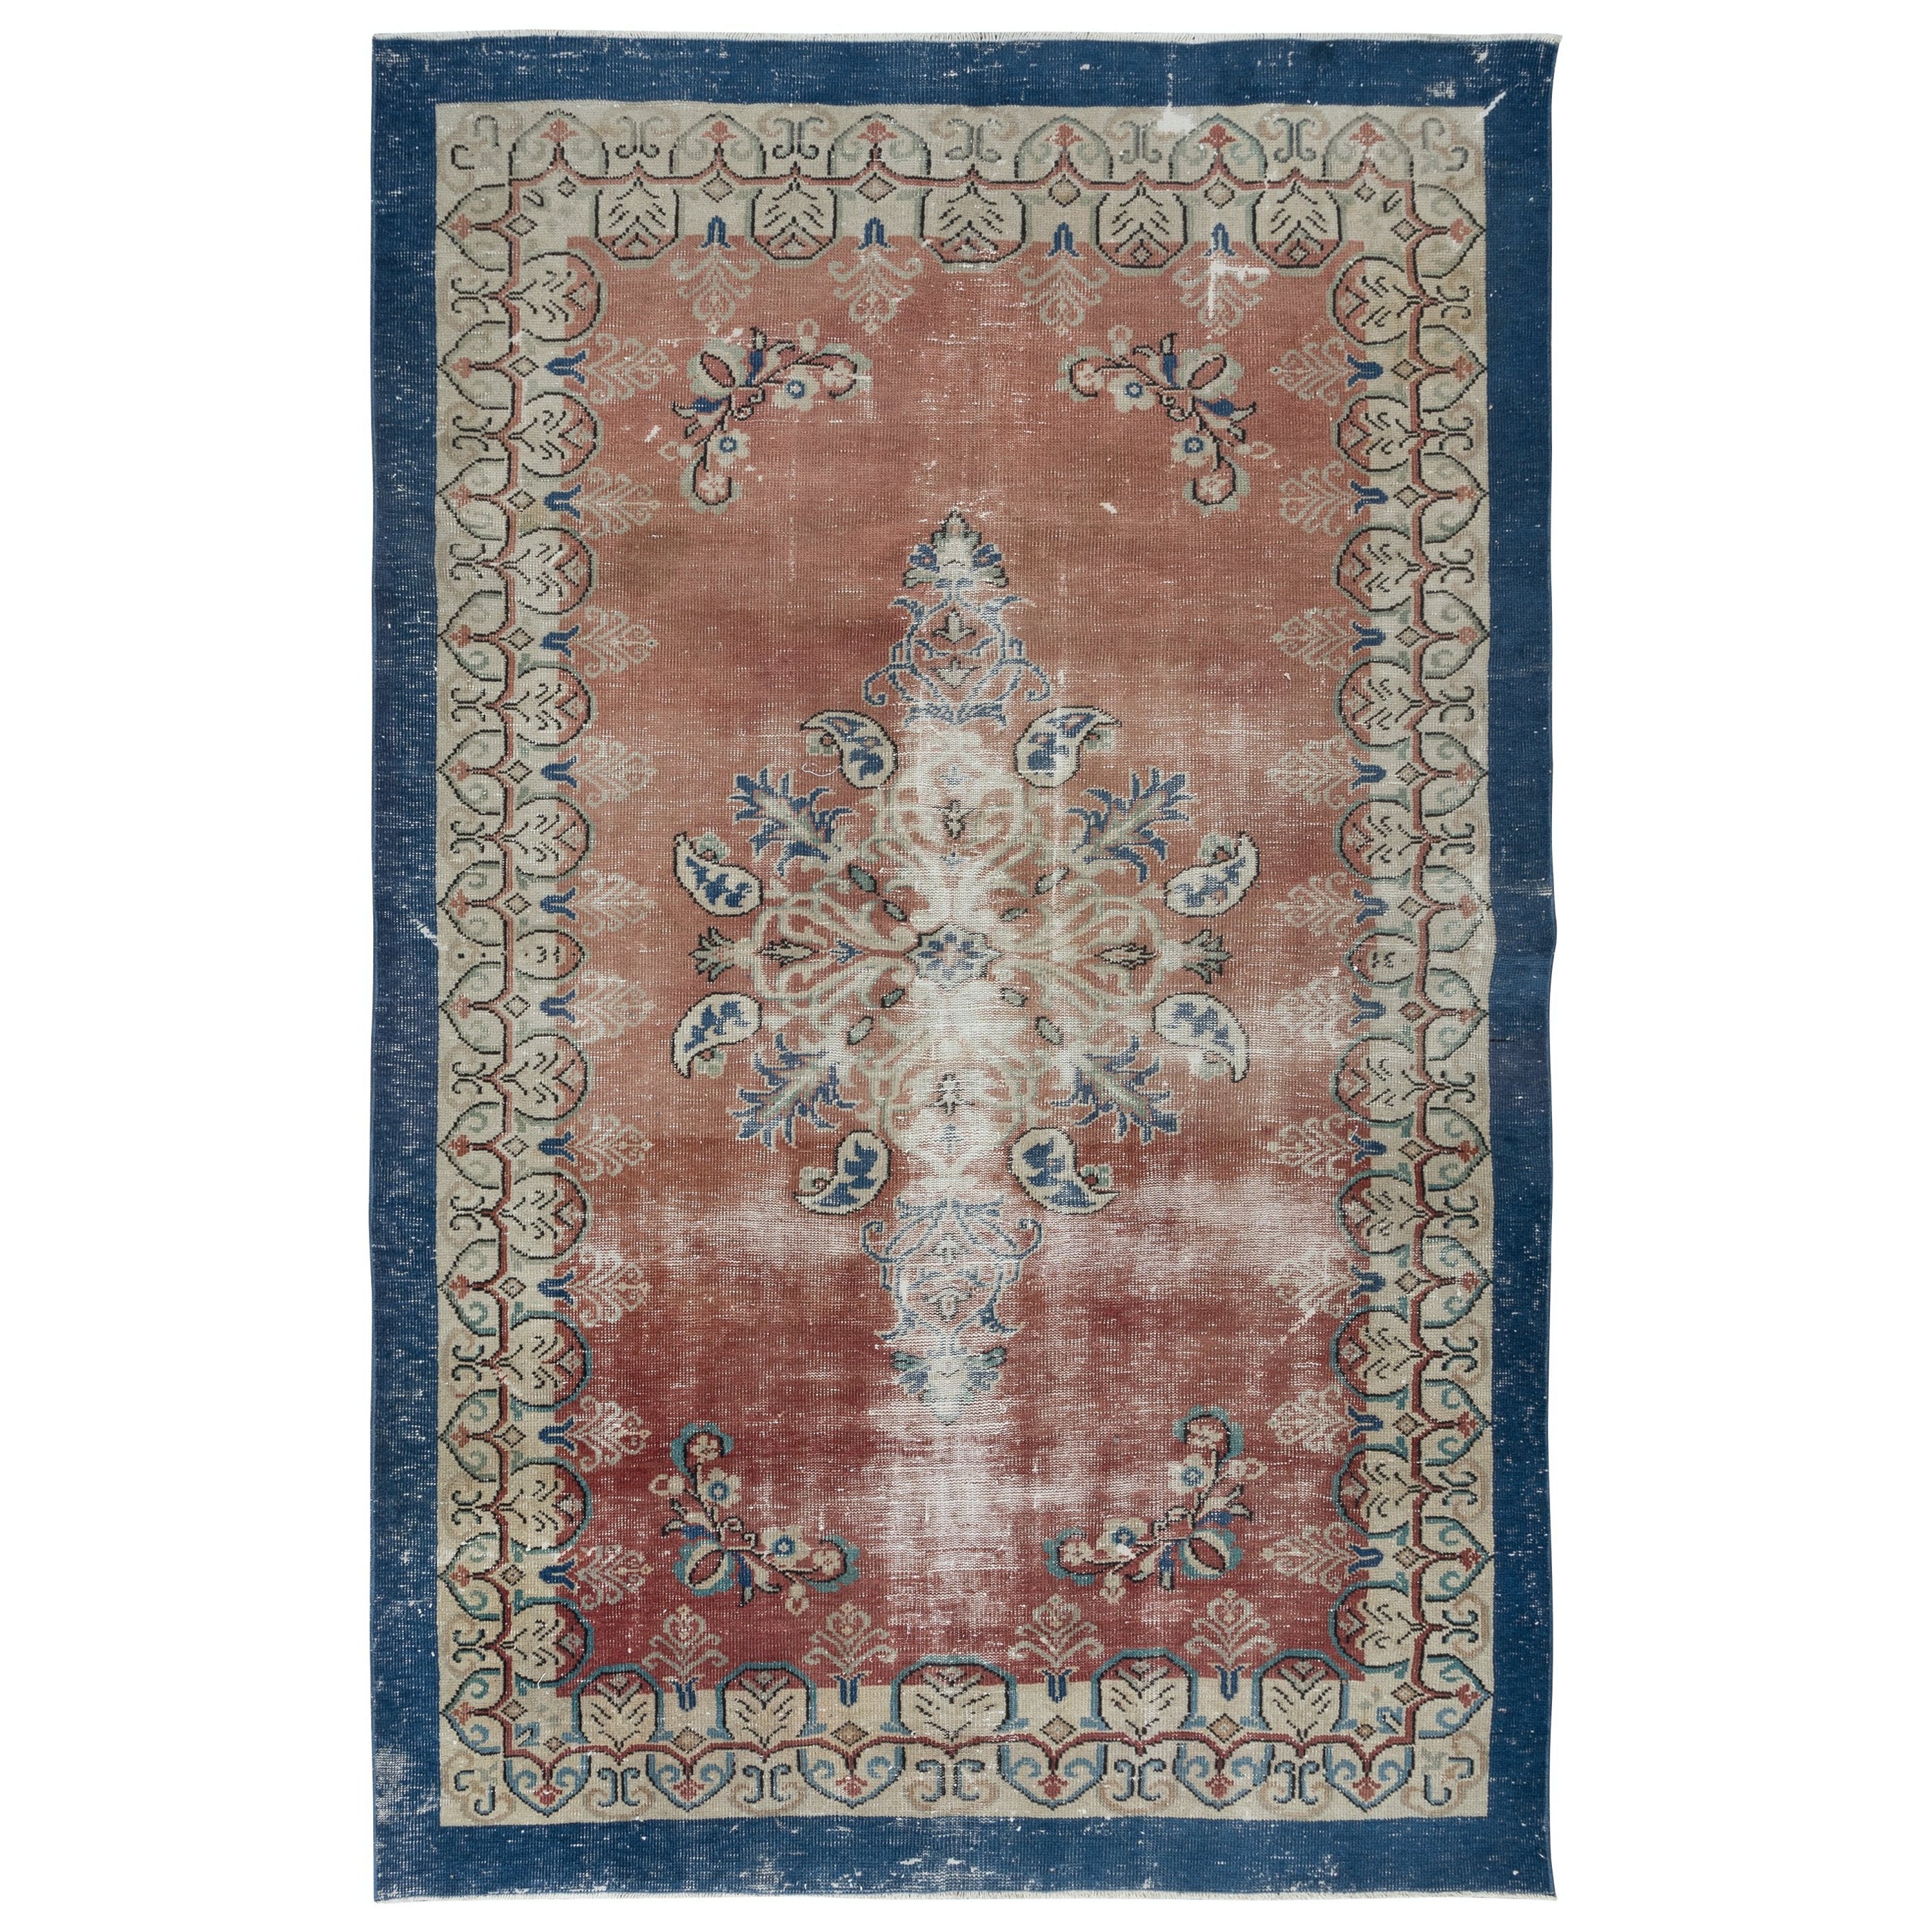 6.3x10 Ft Handmade Turkish Vintage Rug in Soft Red, Beige with Blue Solid Border For Sale